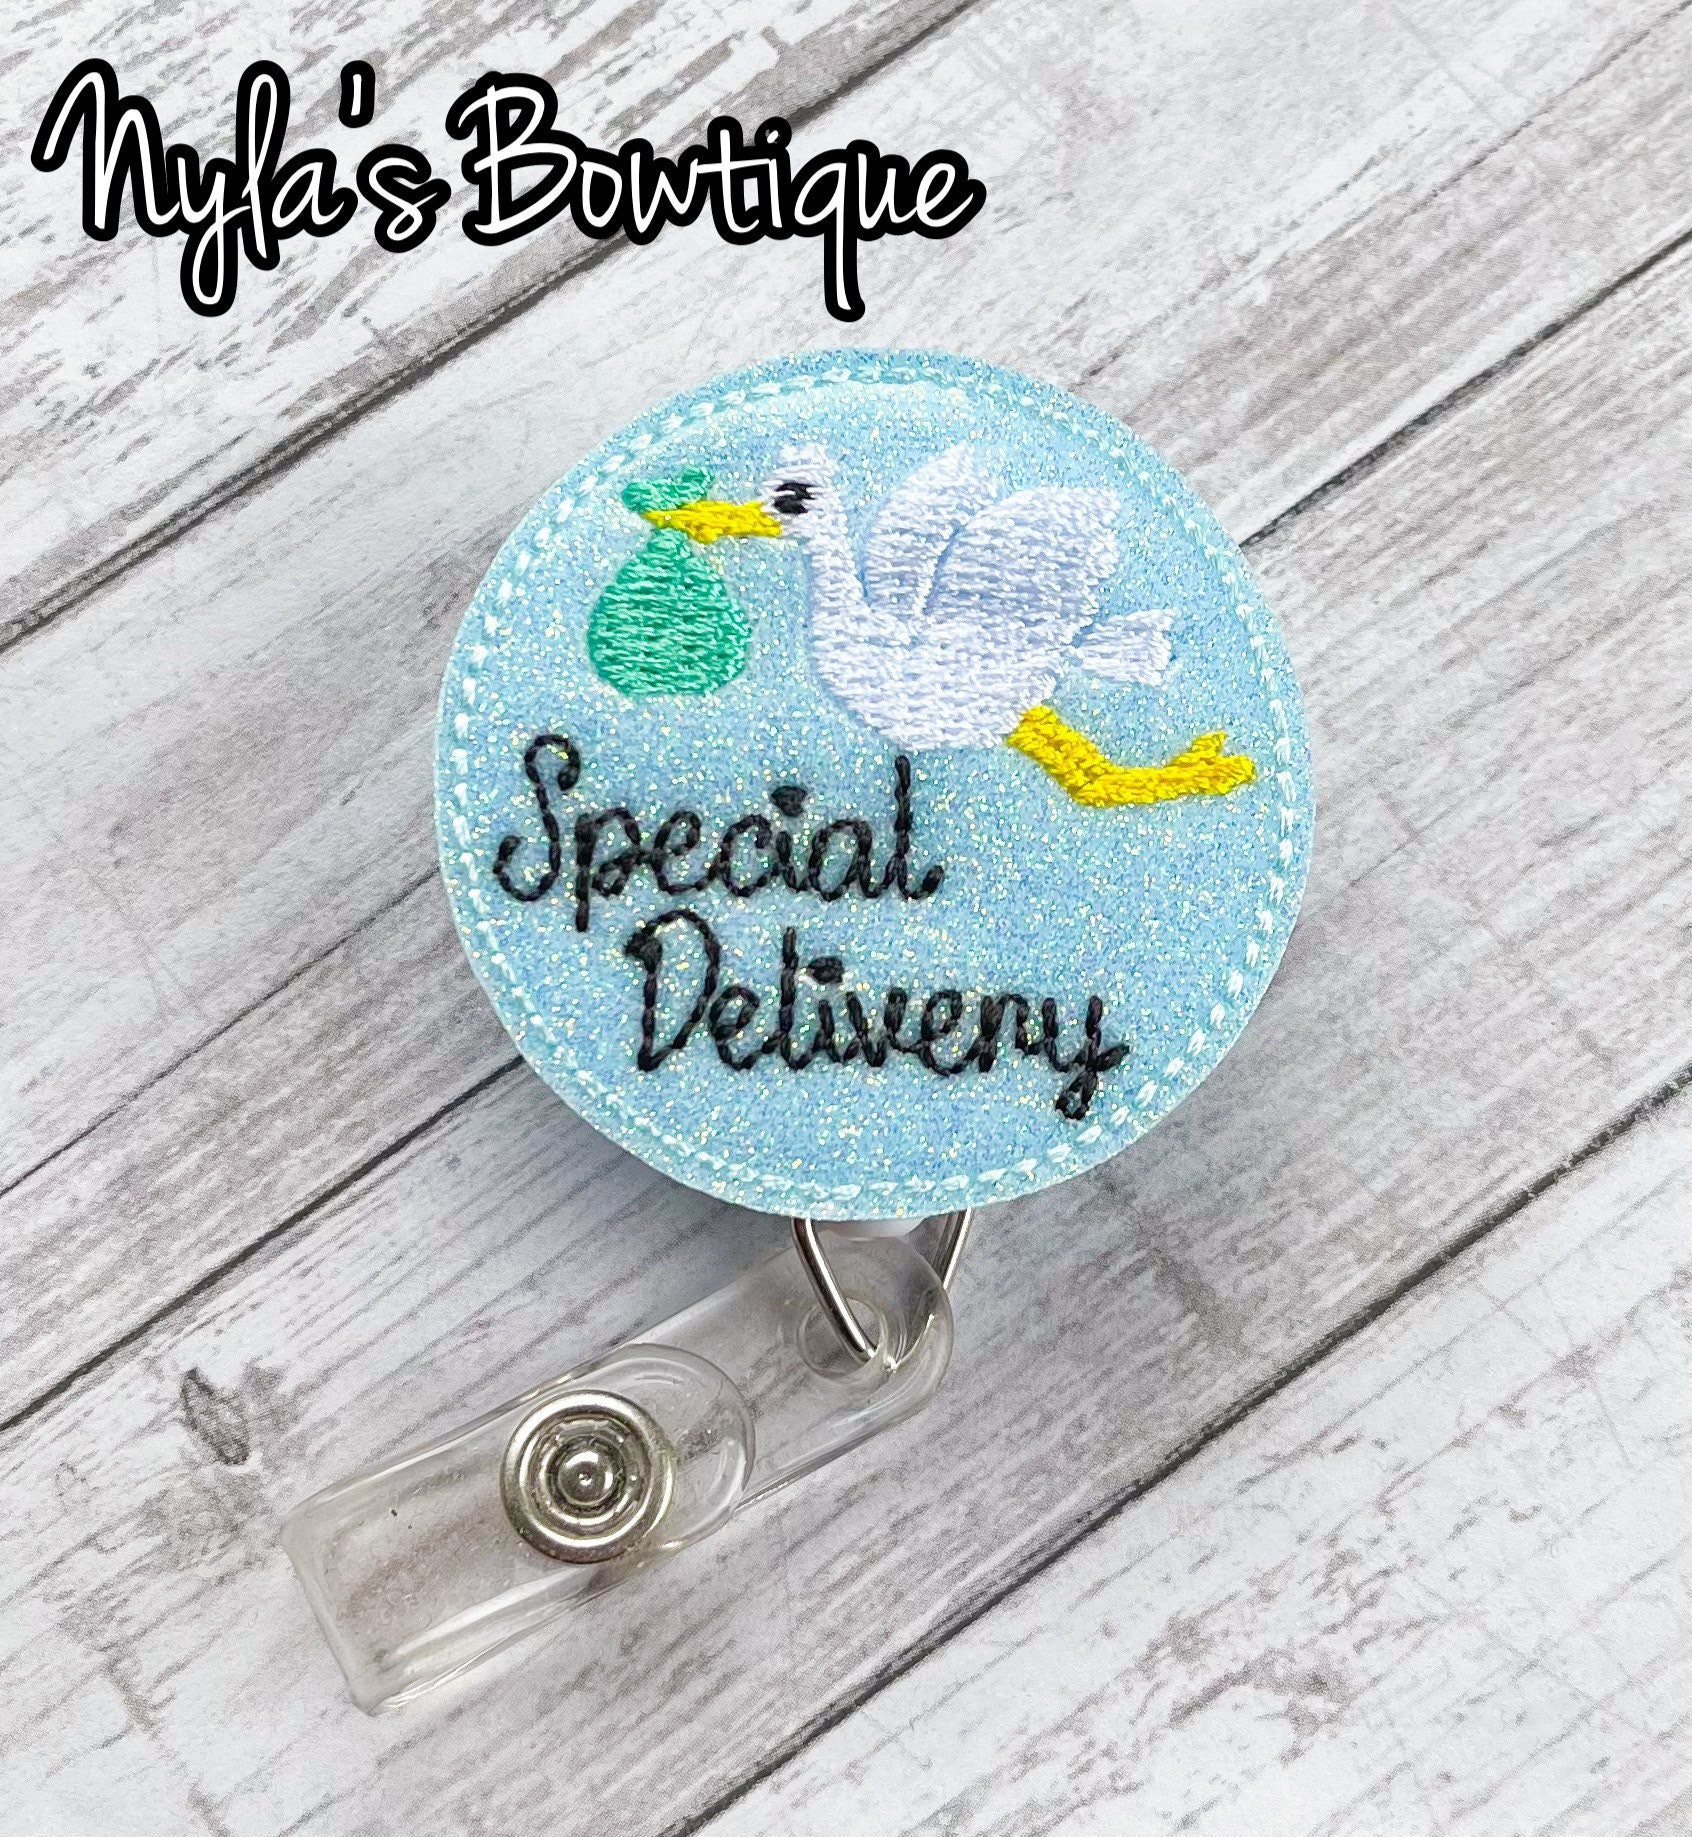 Special Delivery Badge Reel, Stork Badge Reel, L&D Nurse Badge Reel, OBGYN  Nurse, Retractable ID Badge Holder, Midwife Gift, Doula ID Badge -   Canada